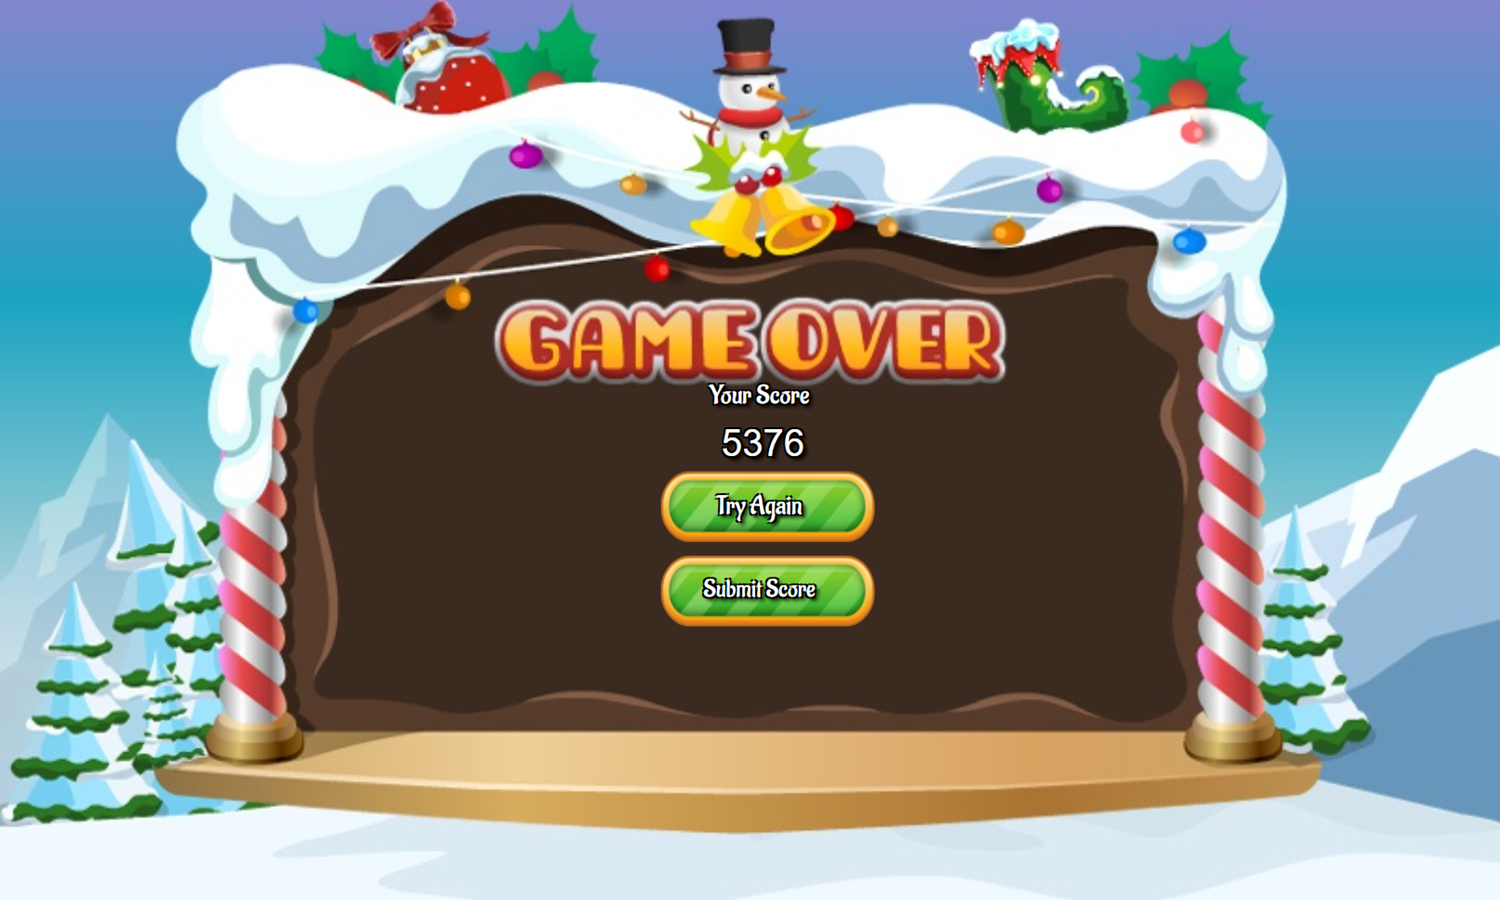 Xmas Card Connect Game Over Screenshot.